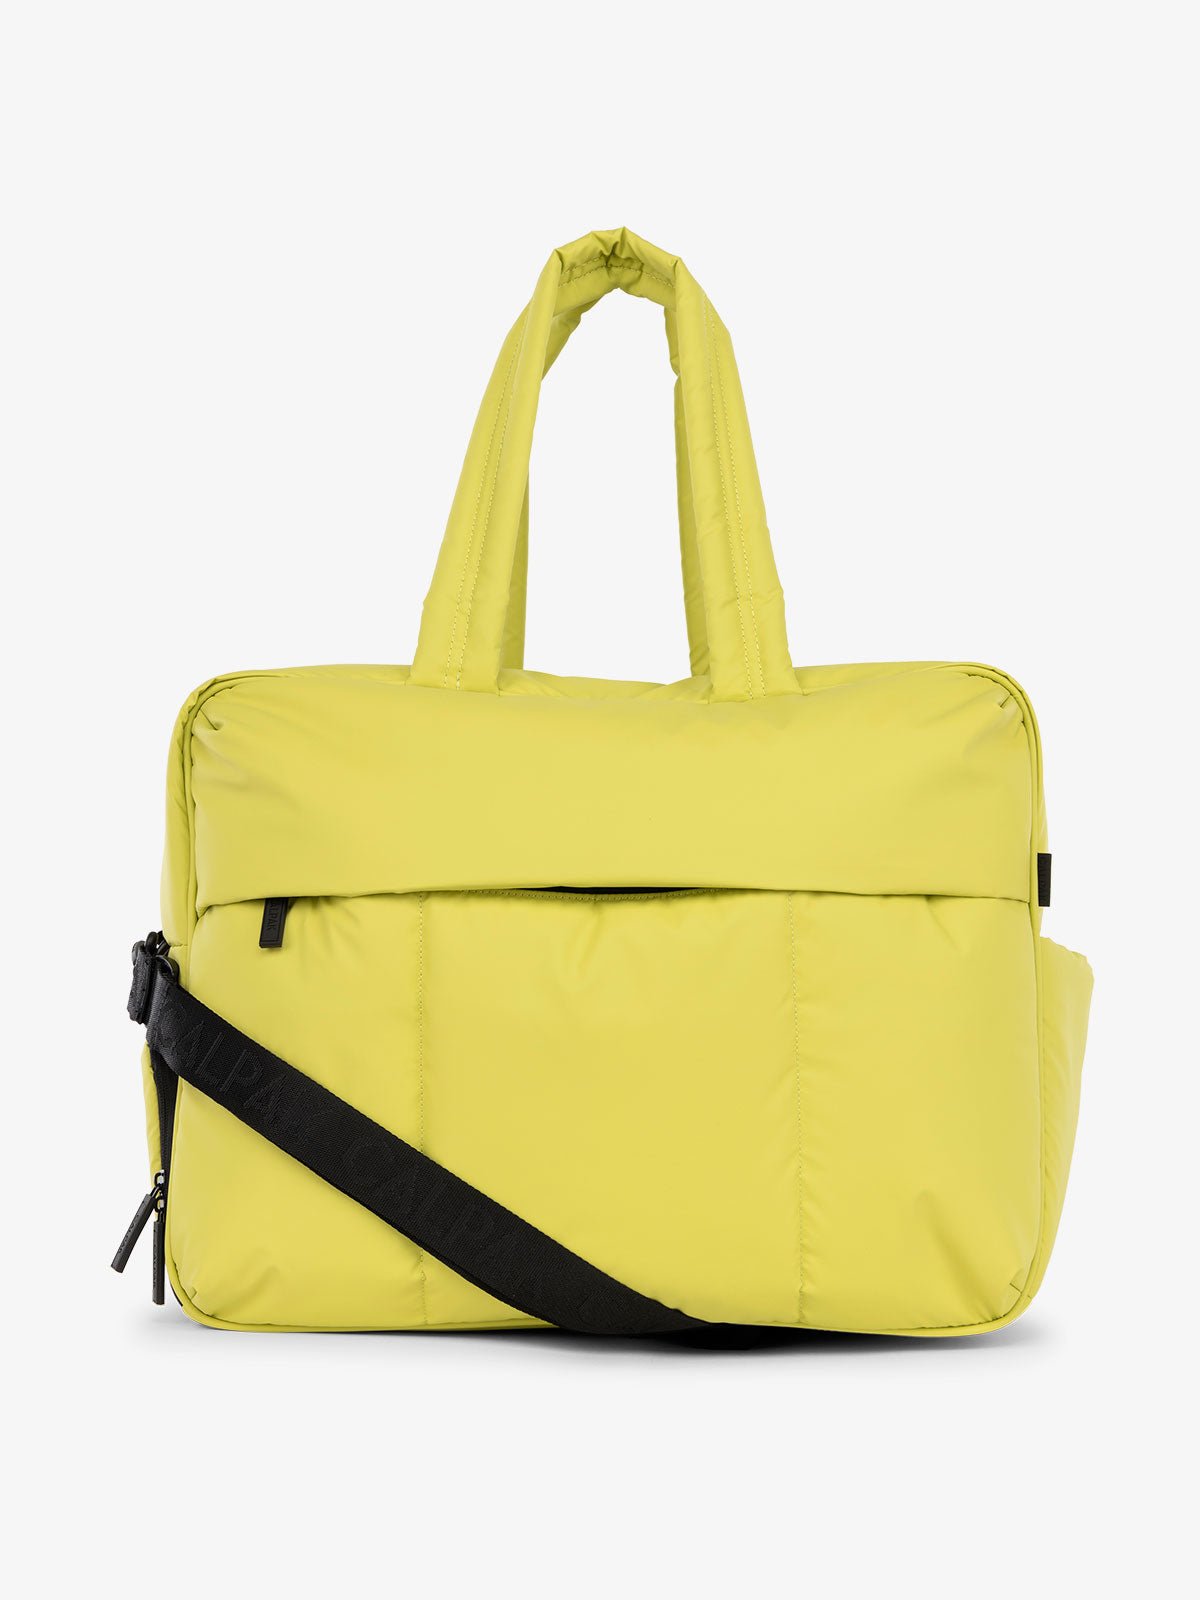 CALPAK Luka large duffel bag for travel with detachable strap and zippered front pocket in celery